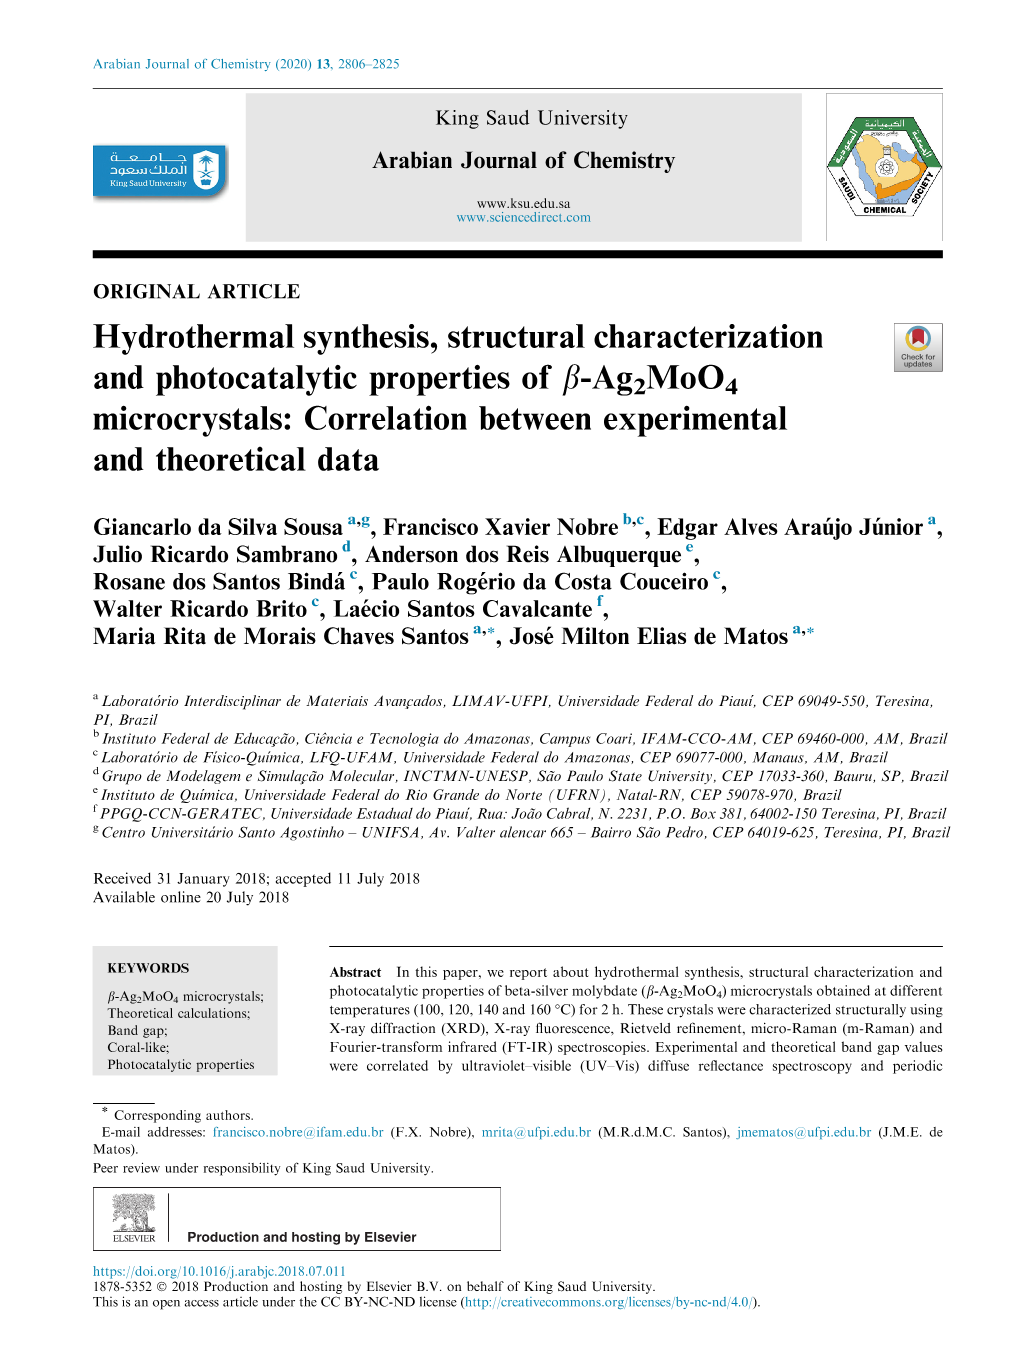 Hydrothermal Synthesis, Structural Characterization and Photocatalytic Properties of B-Ag2moo4 Microcrystals: Correlation Between Experimental and Theoretical Data